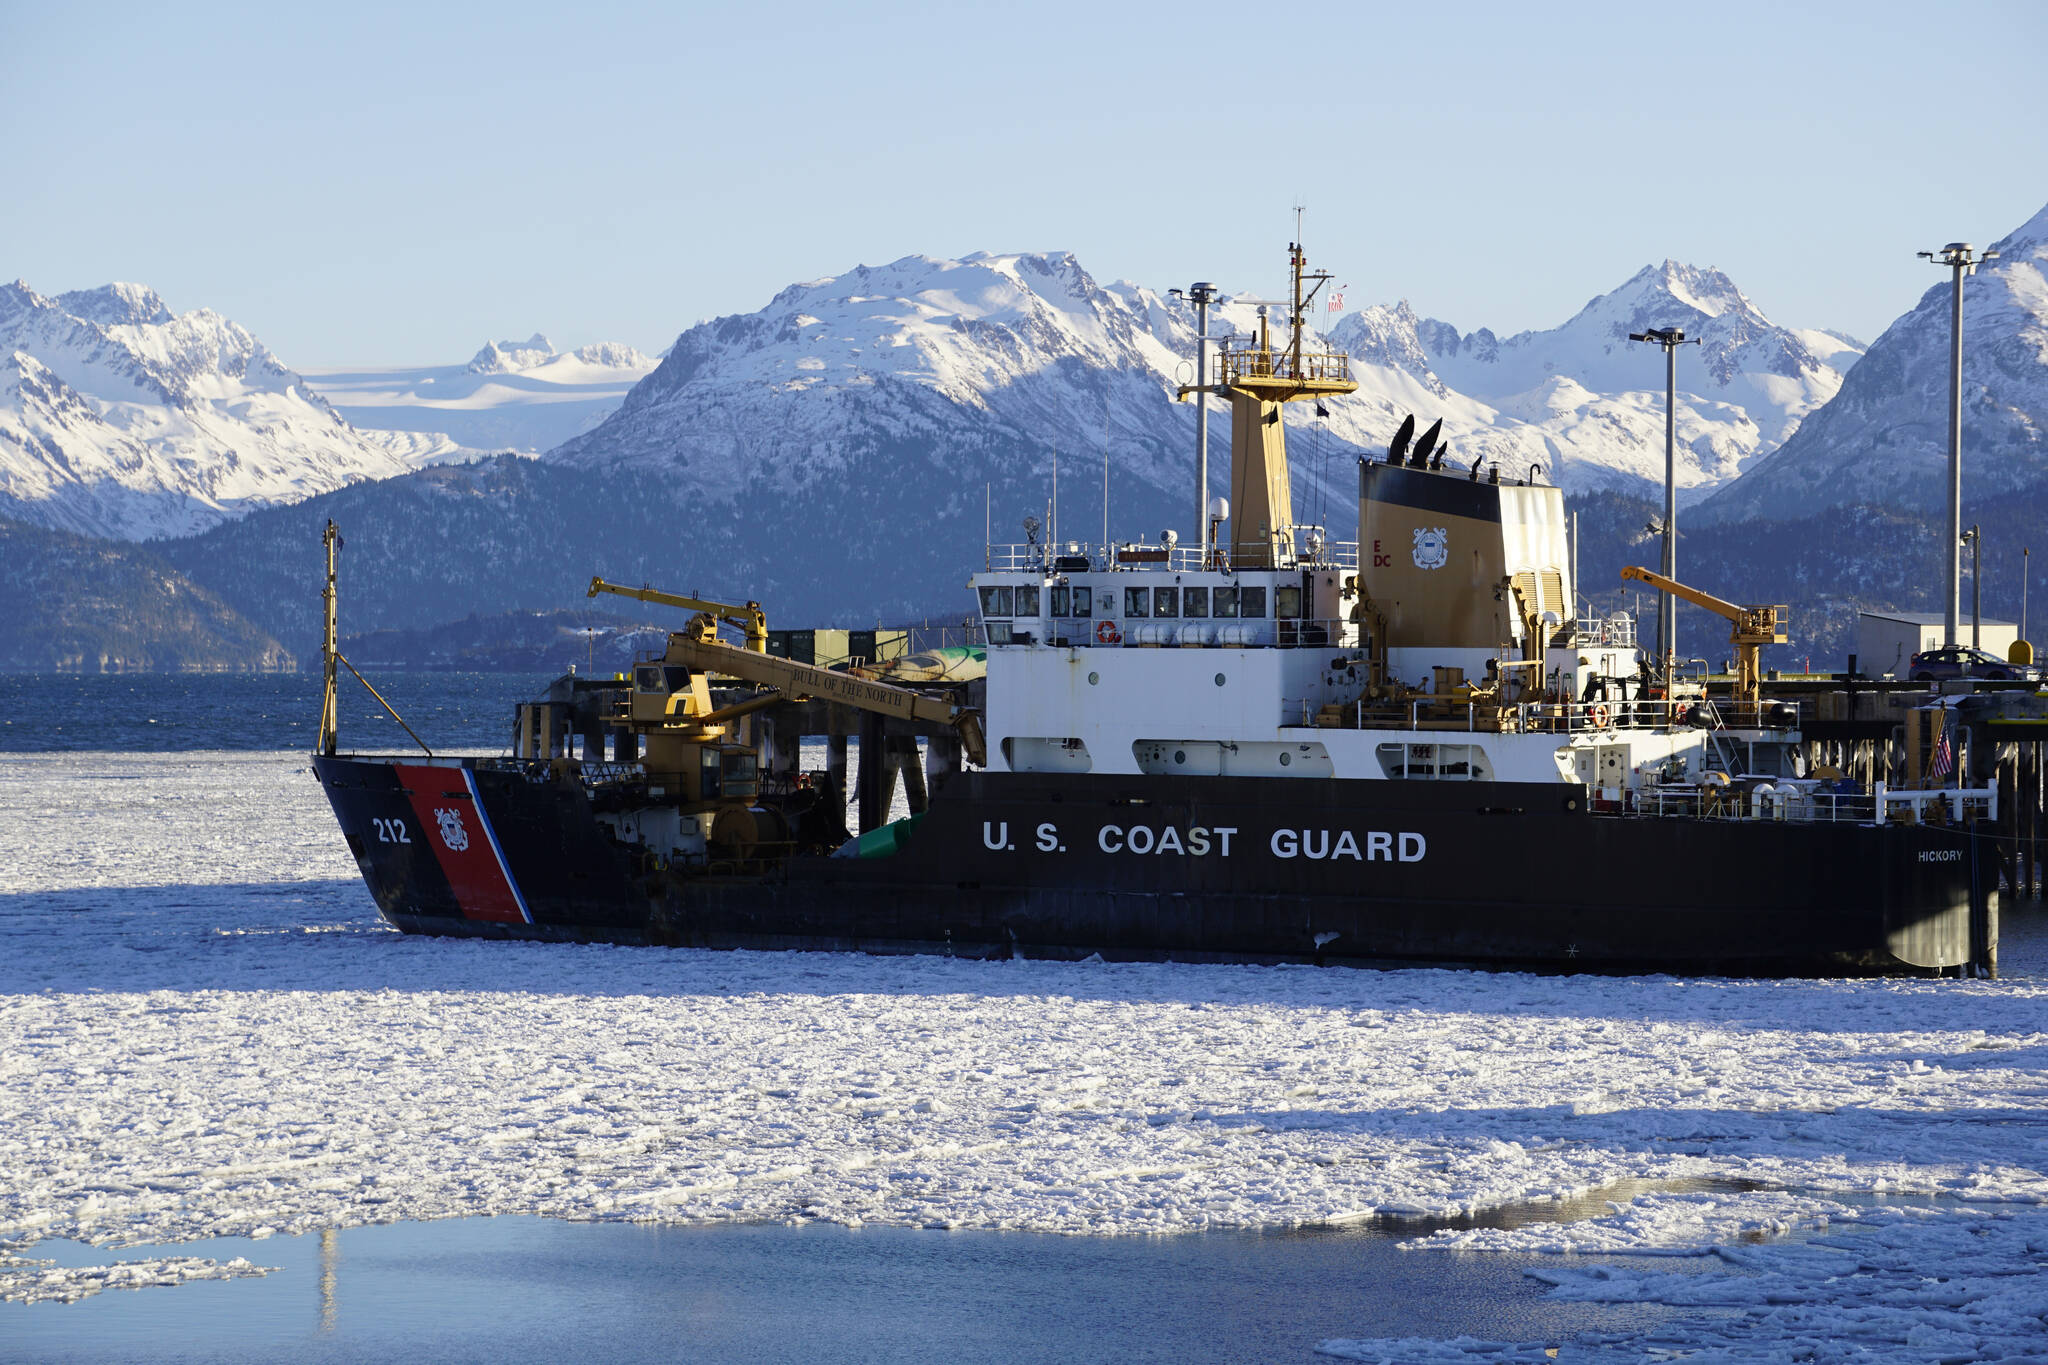 Ice surrounds the U.S. Coast Guard Cutter Hickory at the Pioneer Dock on Friday, Jan. 7, 2022, in Homer, Alaska. The buoy tender is known as "The Bull of the North." (Photo by Michael Armstrong/Homer News)